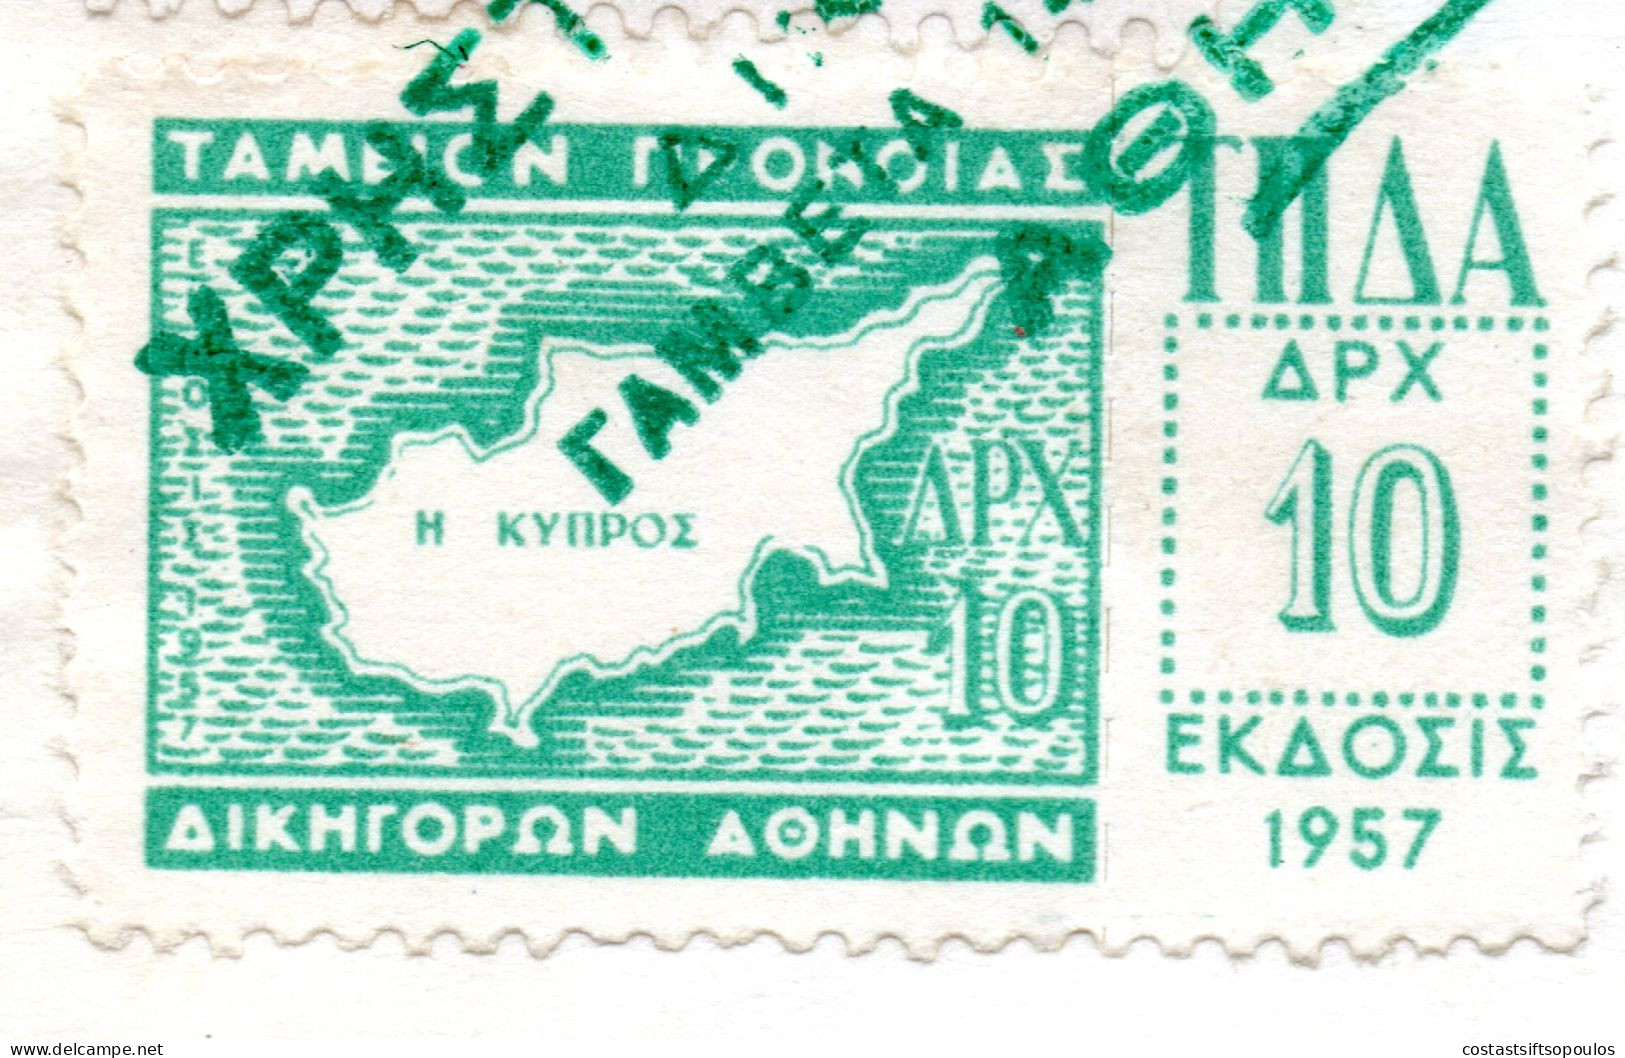 2505. GREECE. 1960 6 PAGES DOCUMENT WITH SCARCE 1957 CYPRUS MAP 10 DR. REVENUE. CROSS FOLDED. WILL BE SHIPPED FOLDED - Fiscales